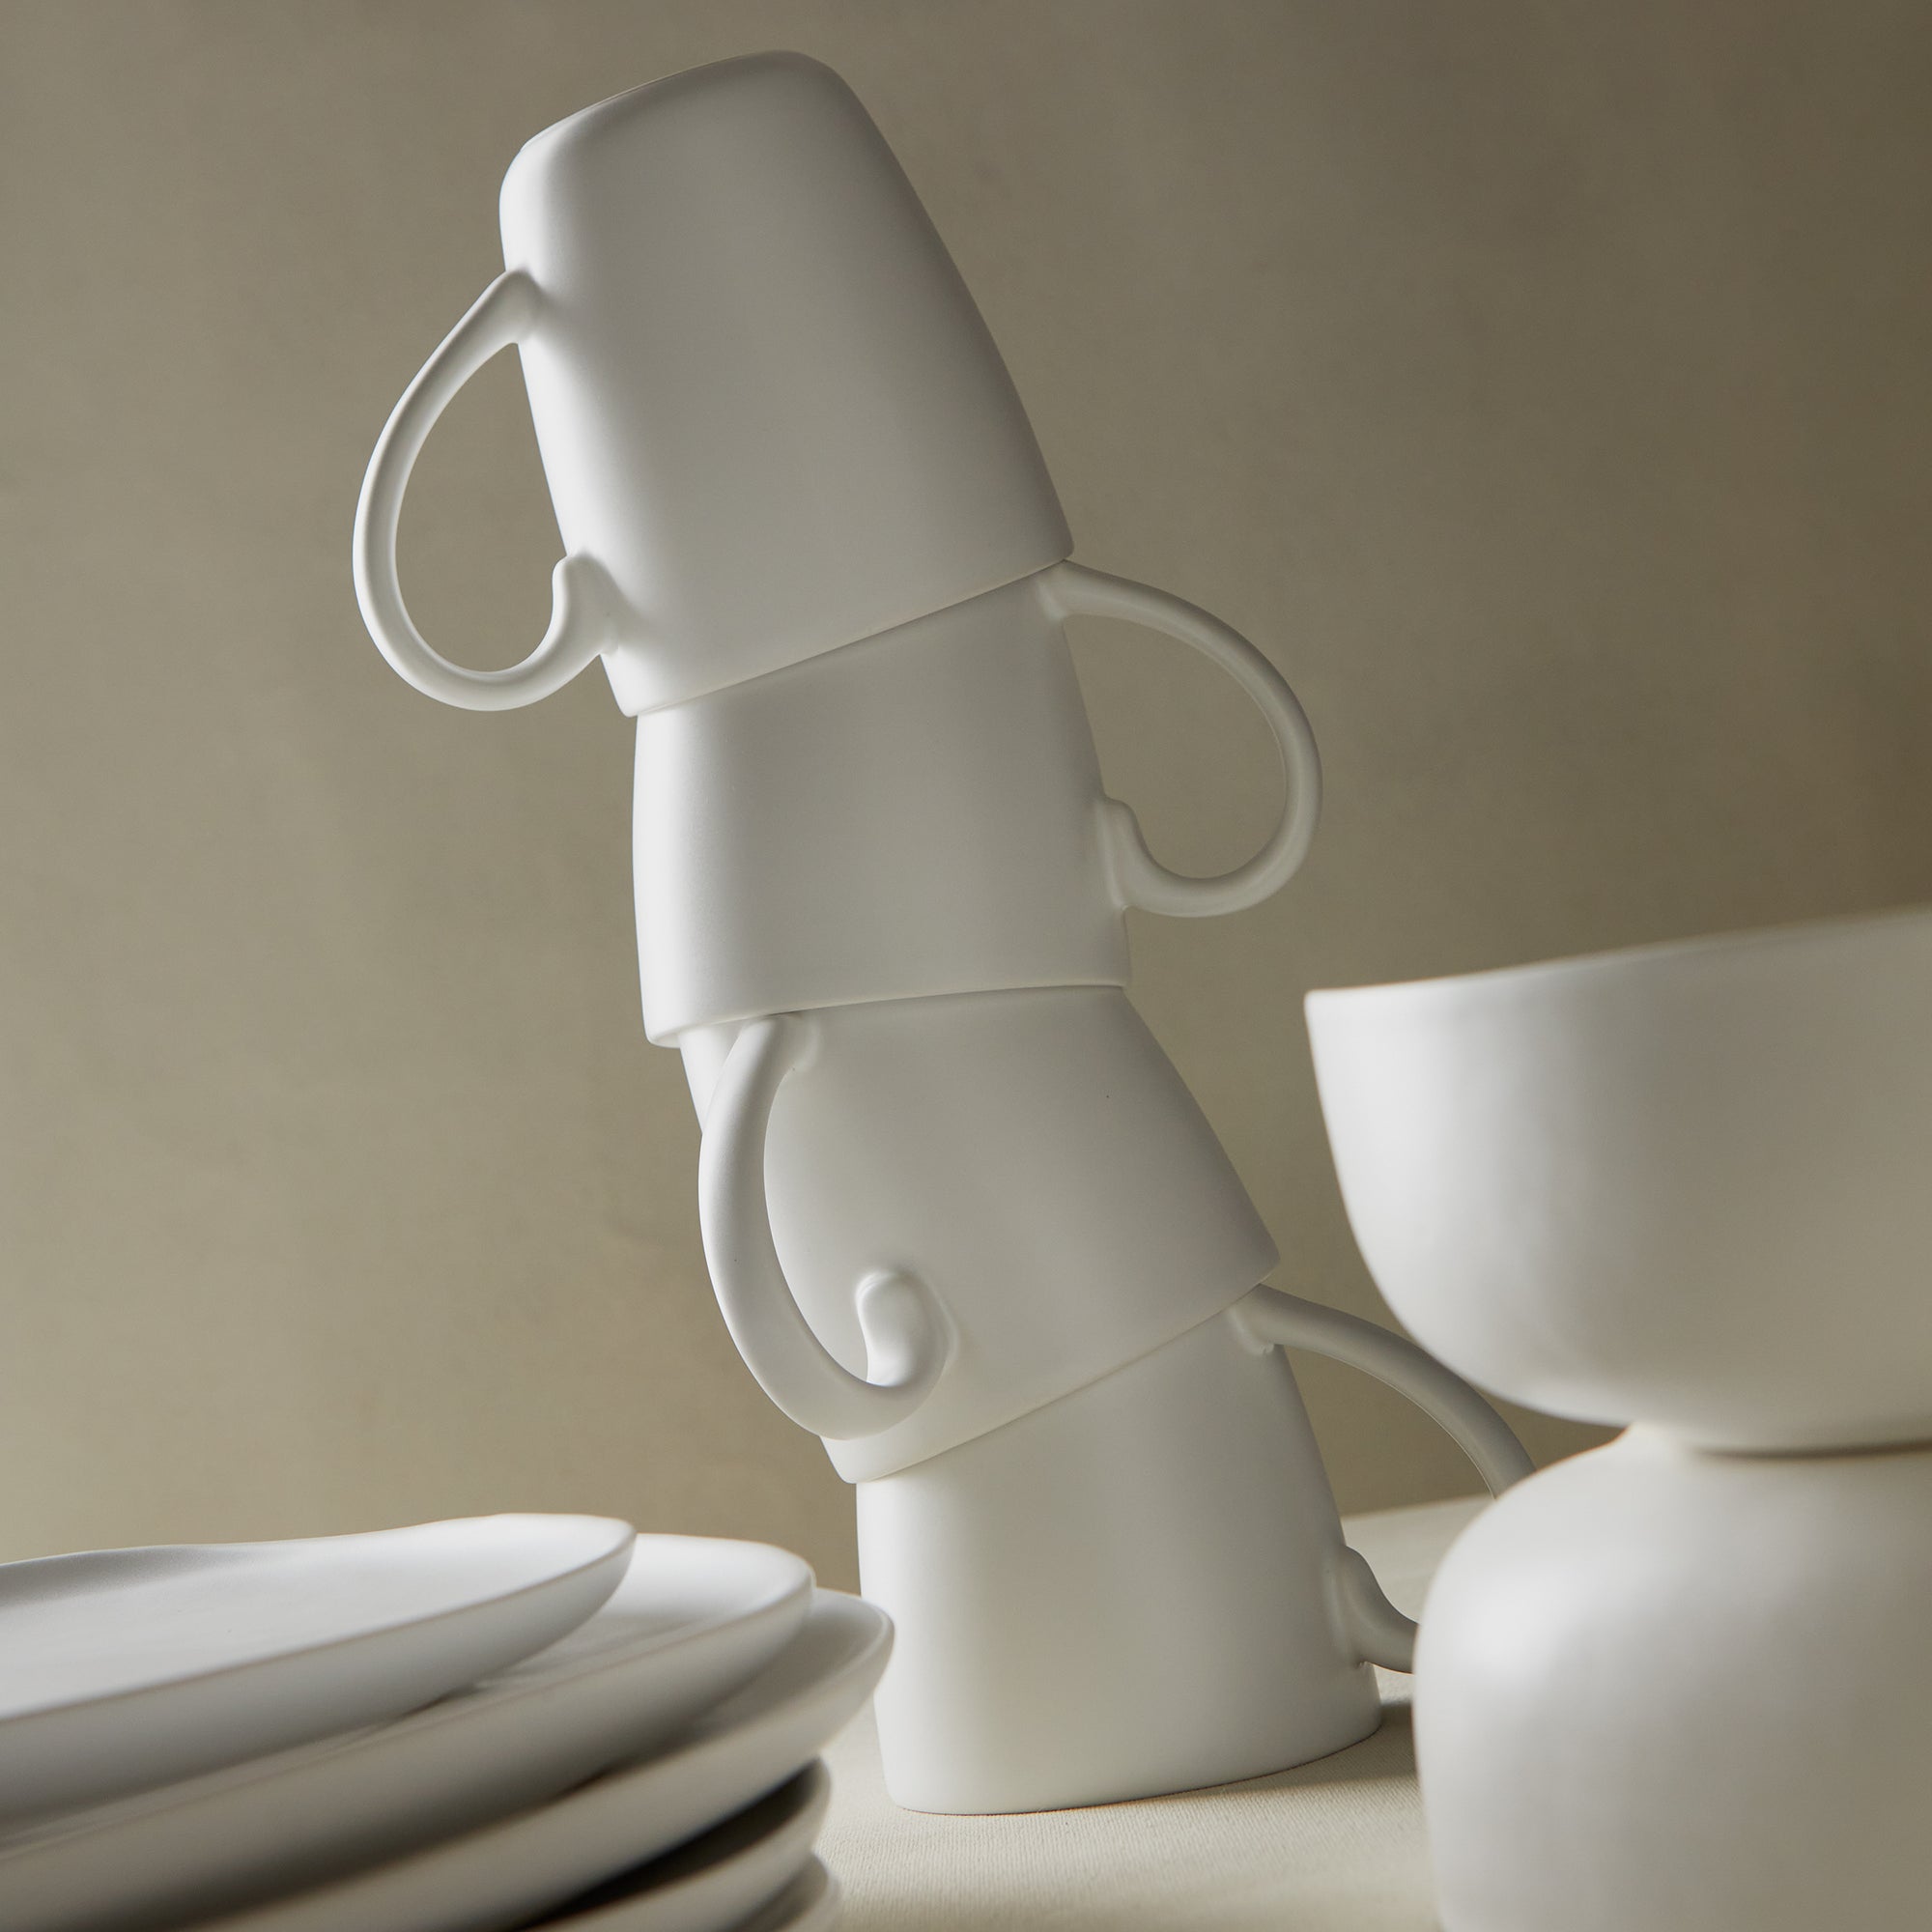 Crafted in Portugal for Elte, the Organic Dinnerware Collection is characterized by its soft, organic curves and matte glaze.